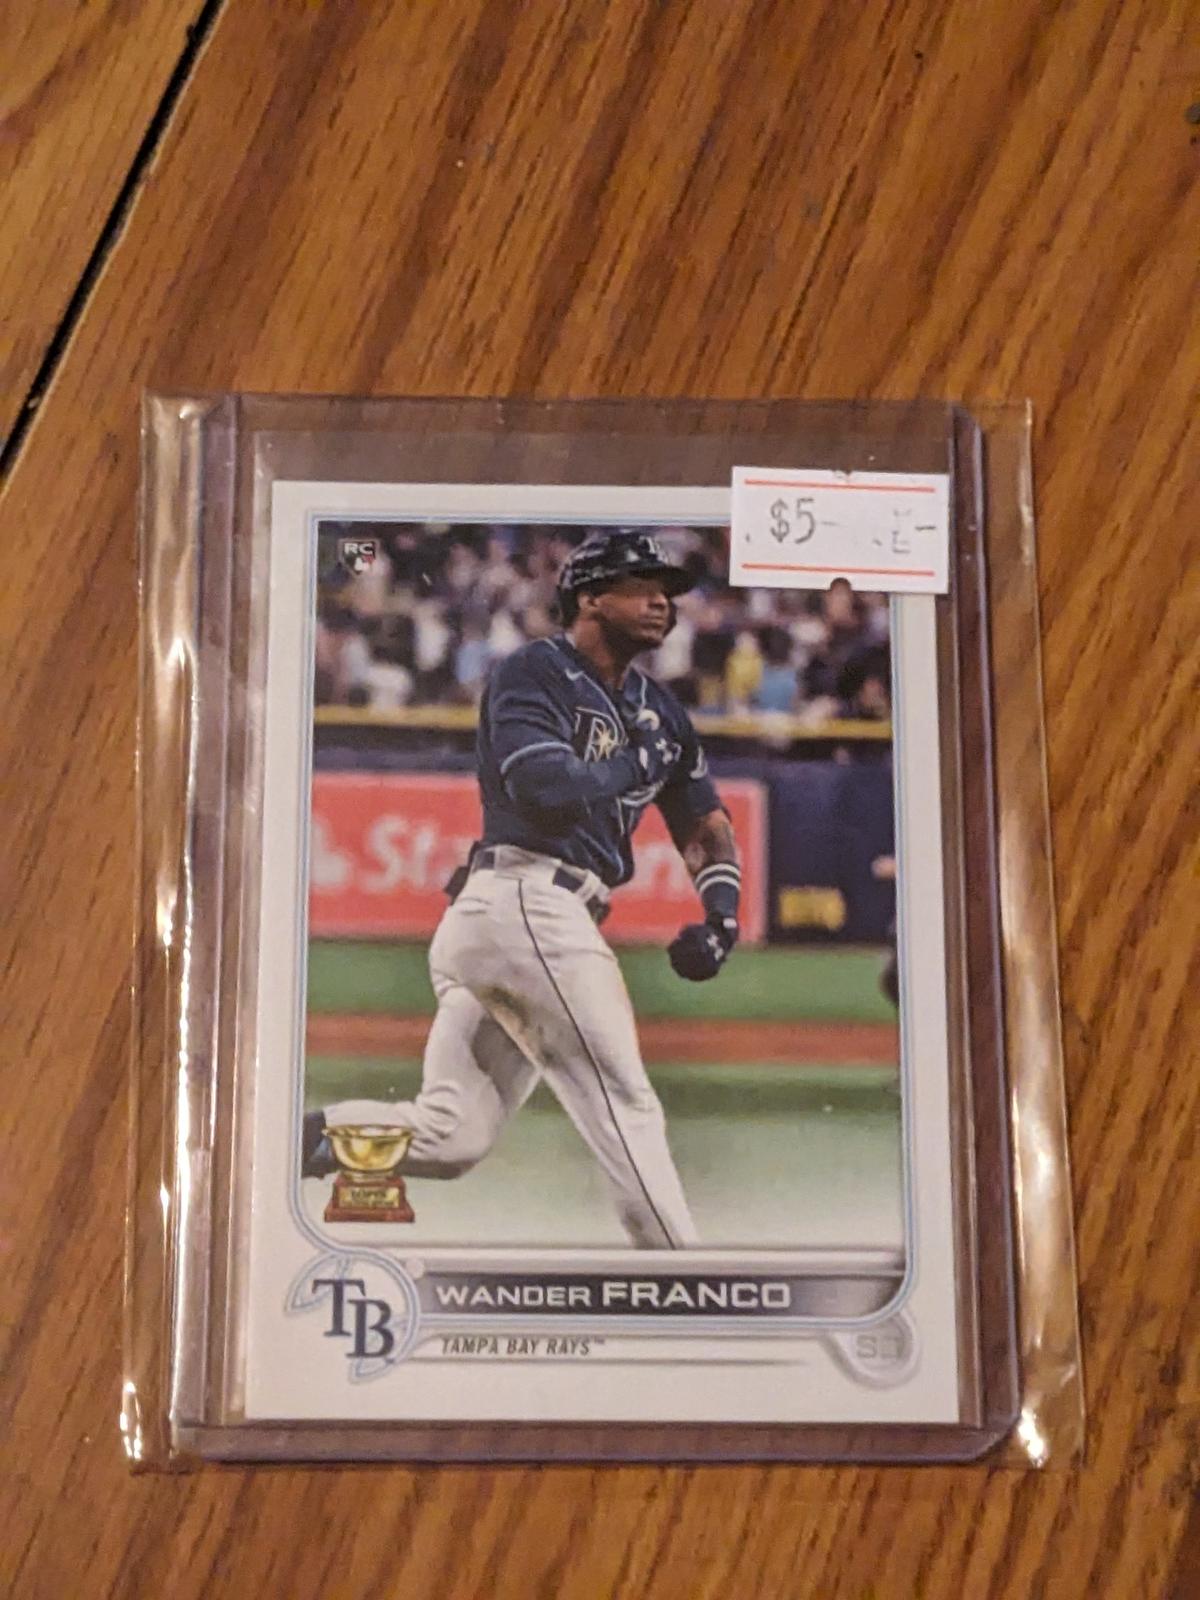 2022 Topps Series 1 Base #215 Wander Franco Tampa Bay Rays RC Rookie Card TROPHY